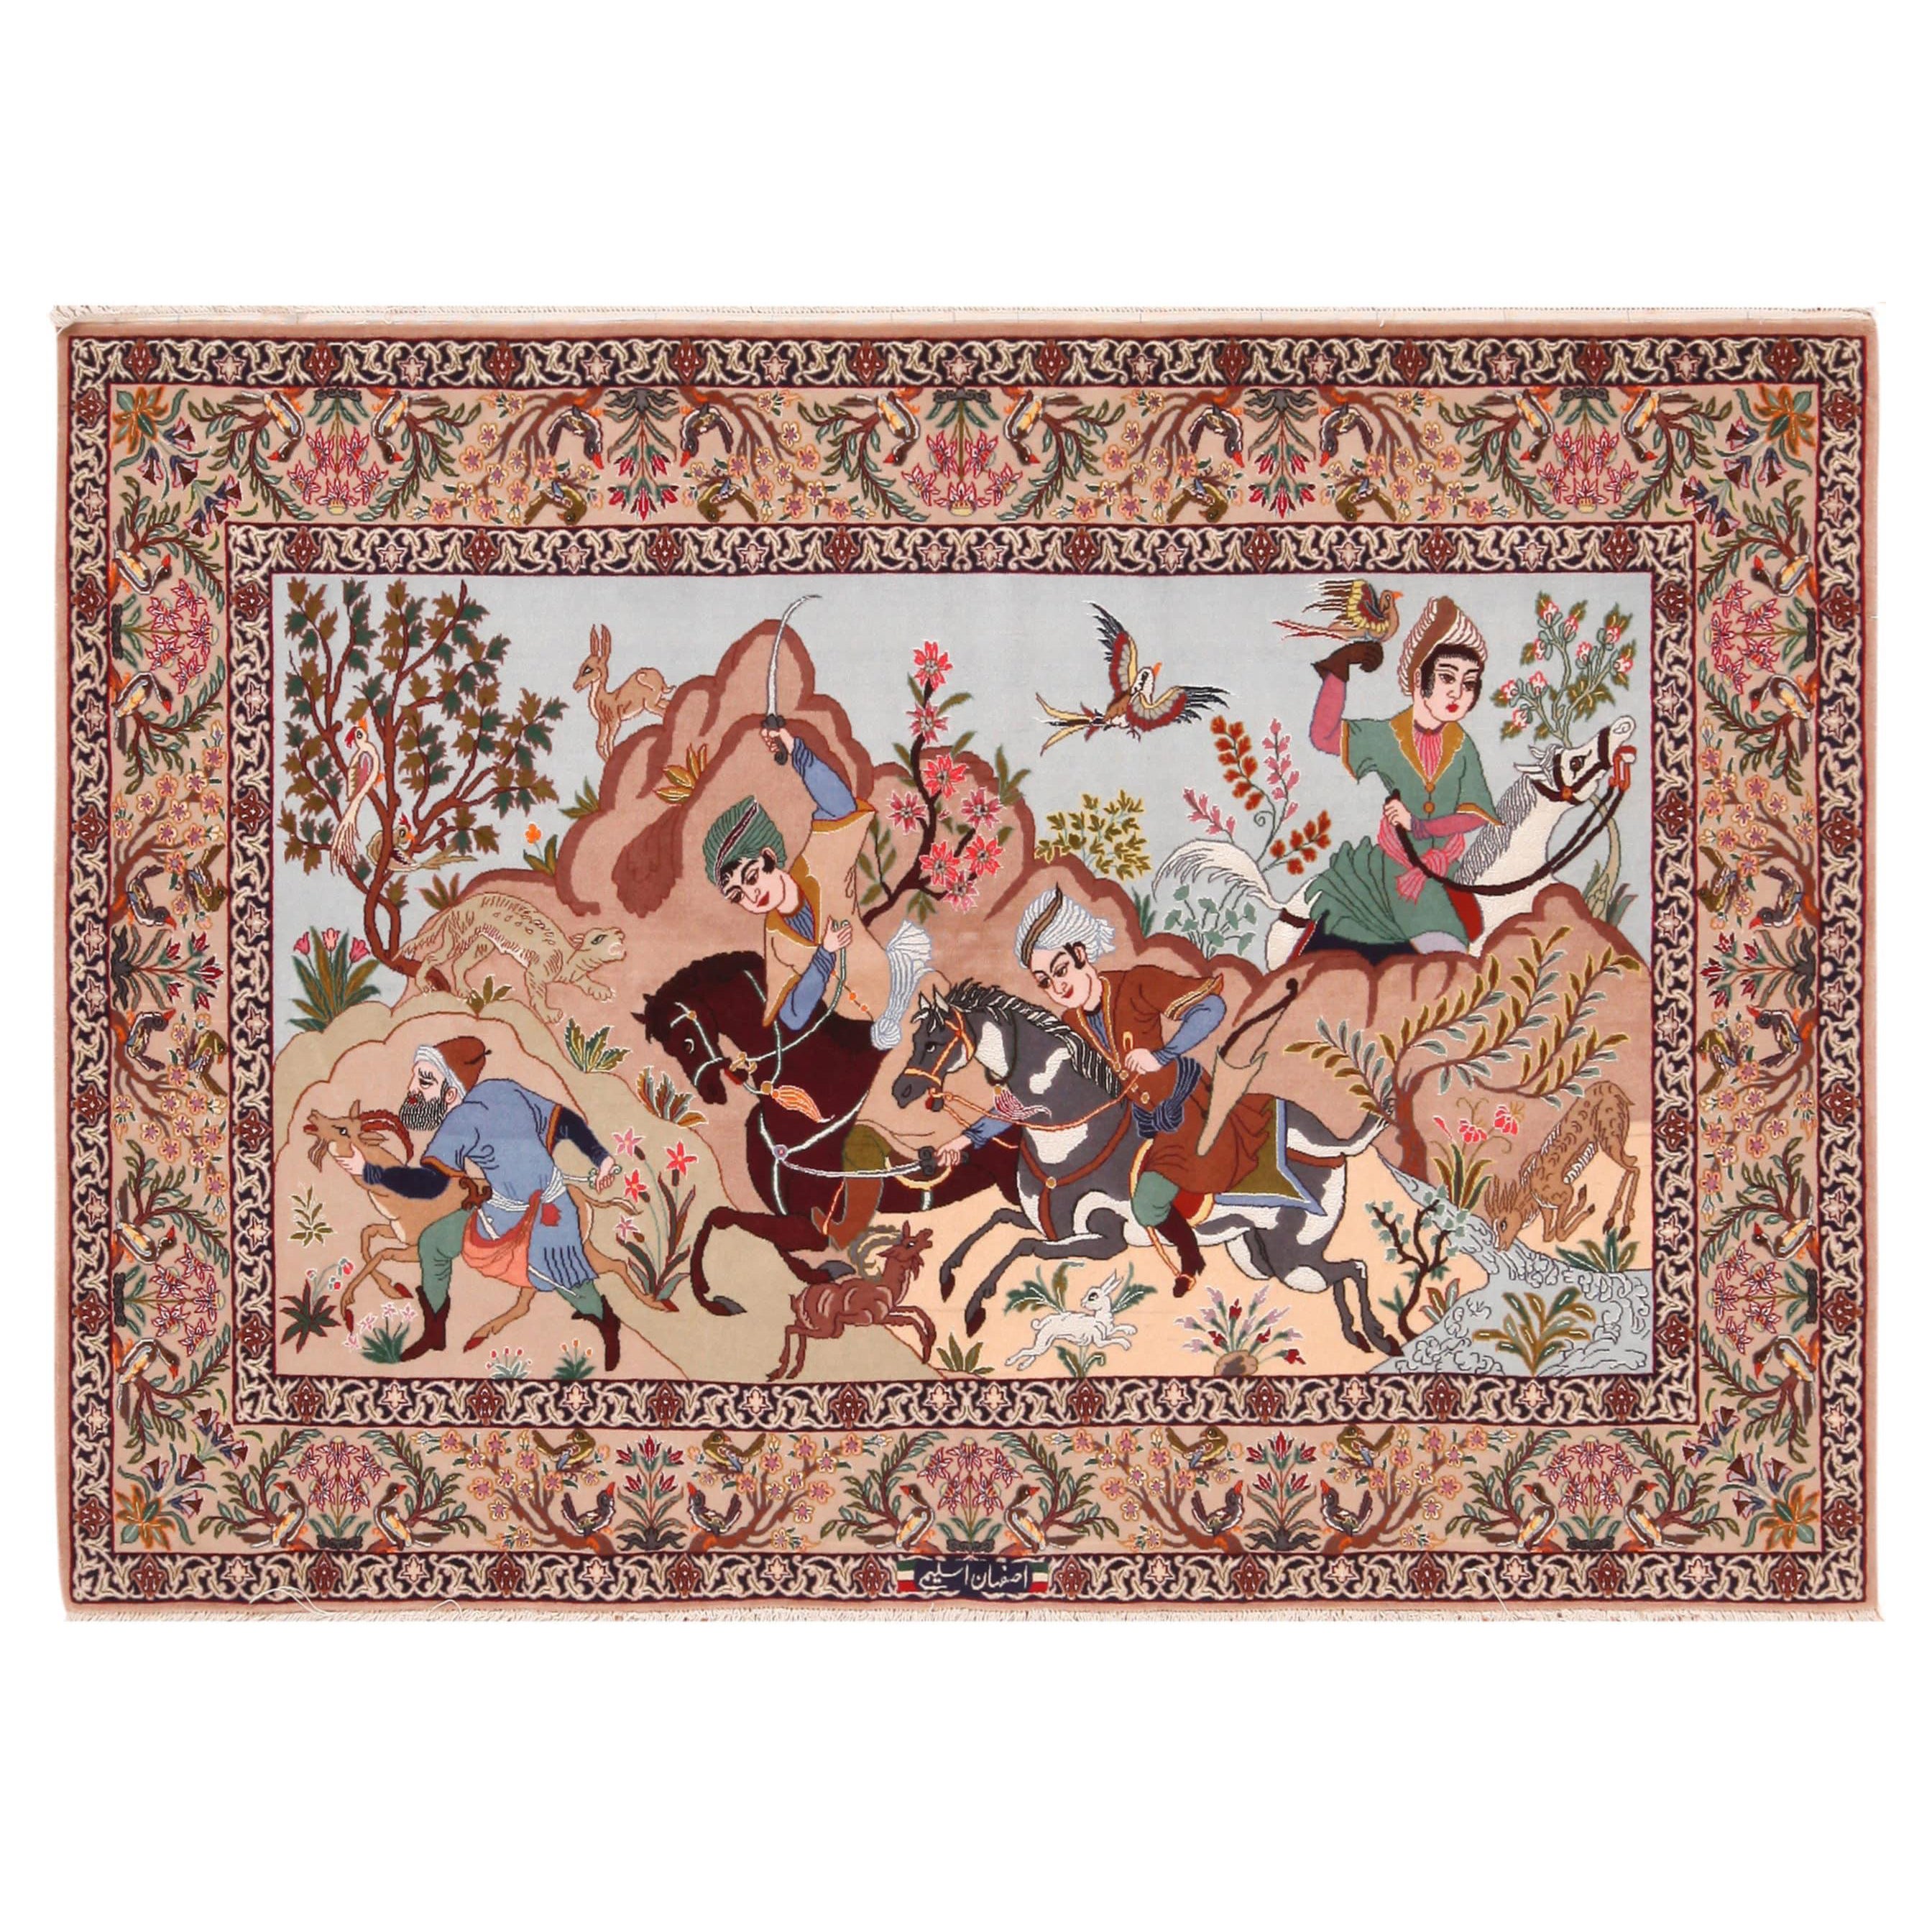 Vintage Persian Isfahan Hunting Scene Rug. Size: 3 ft 9 in x 5 ft 3 in